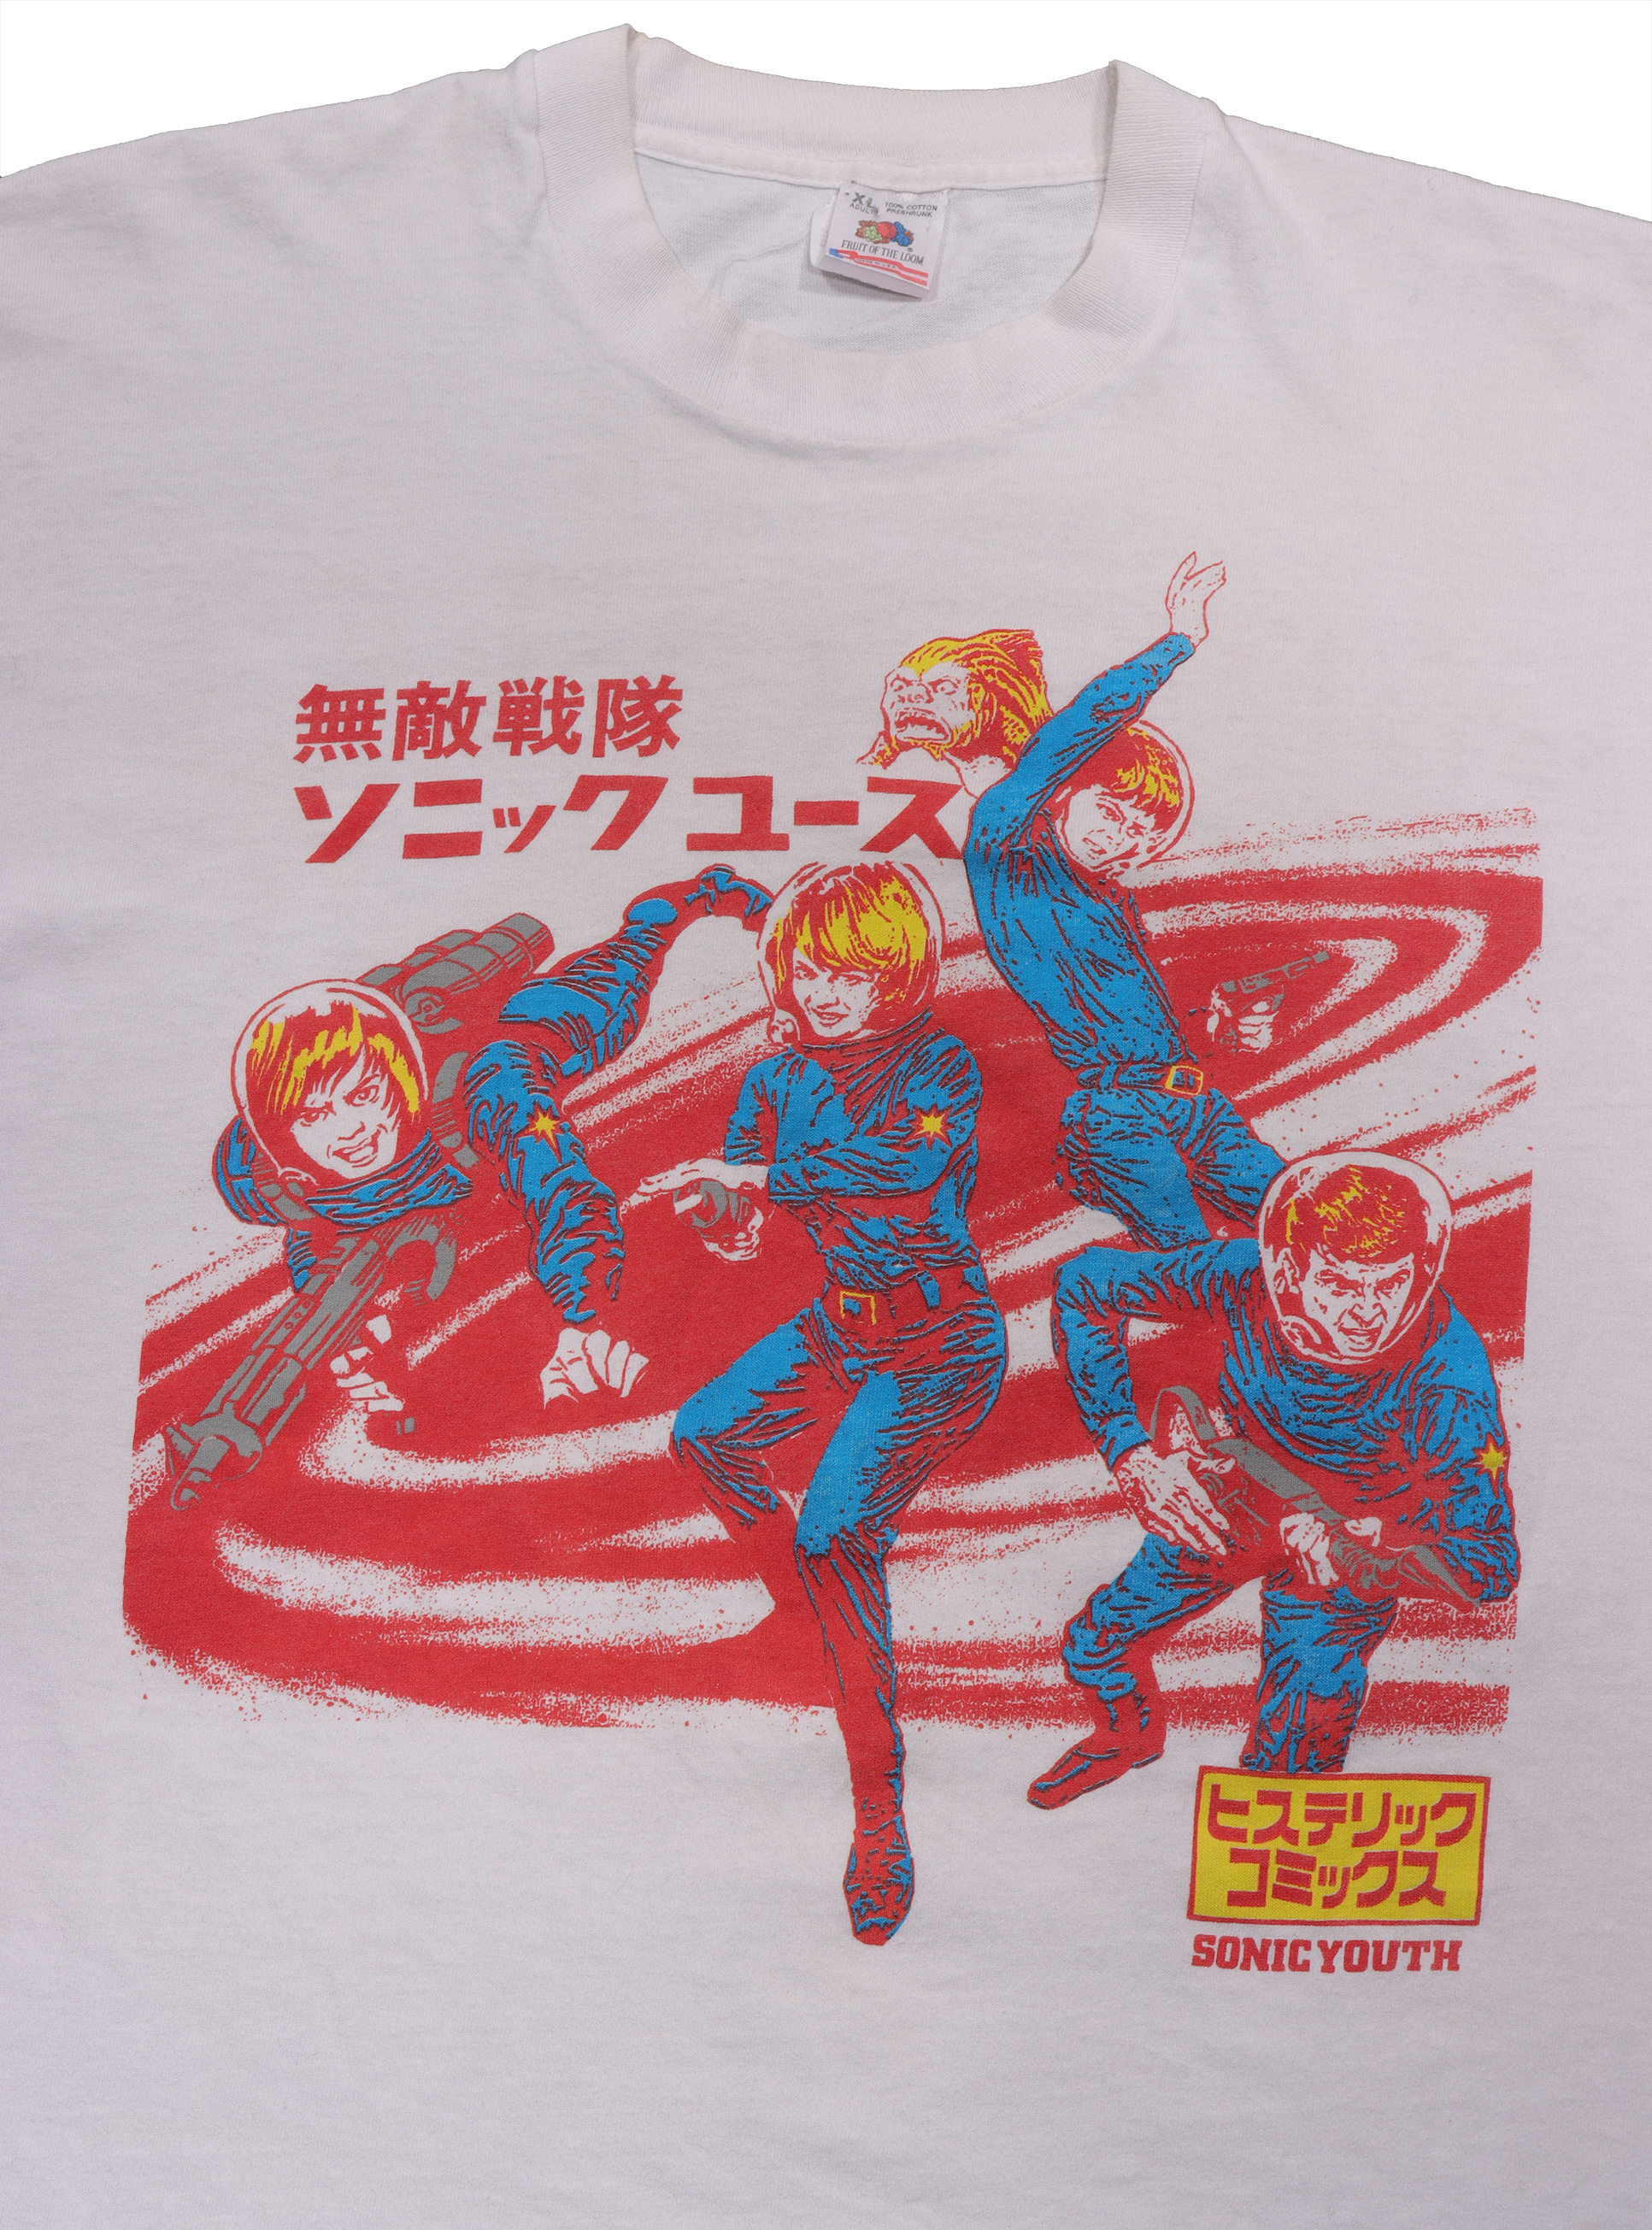 Sonic Youth Hysteric Glamor Invincible Squadron T-Shirt